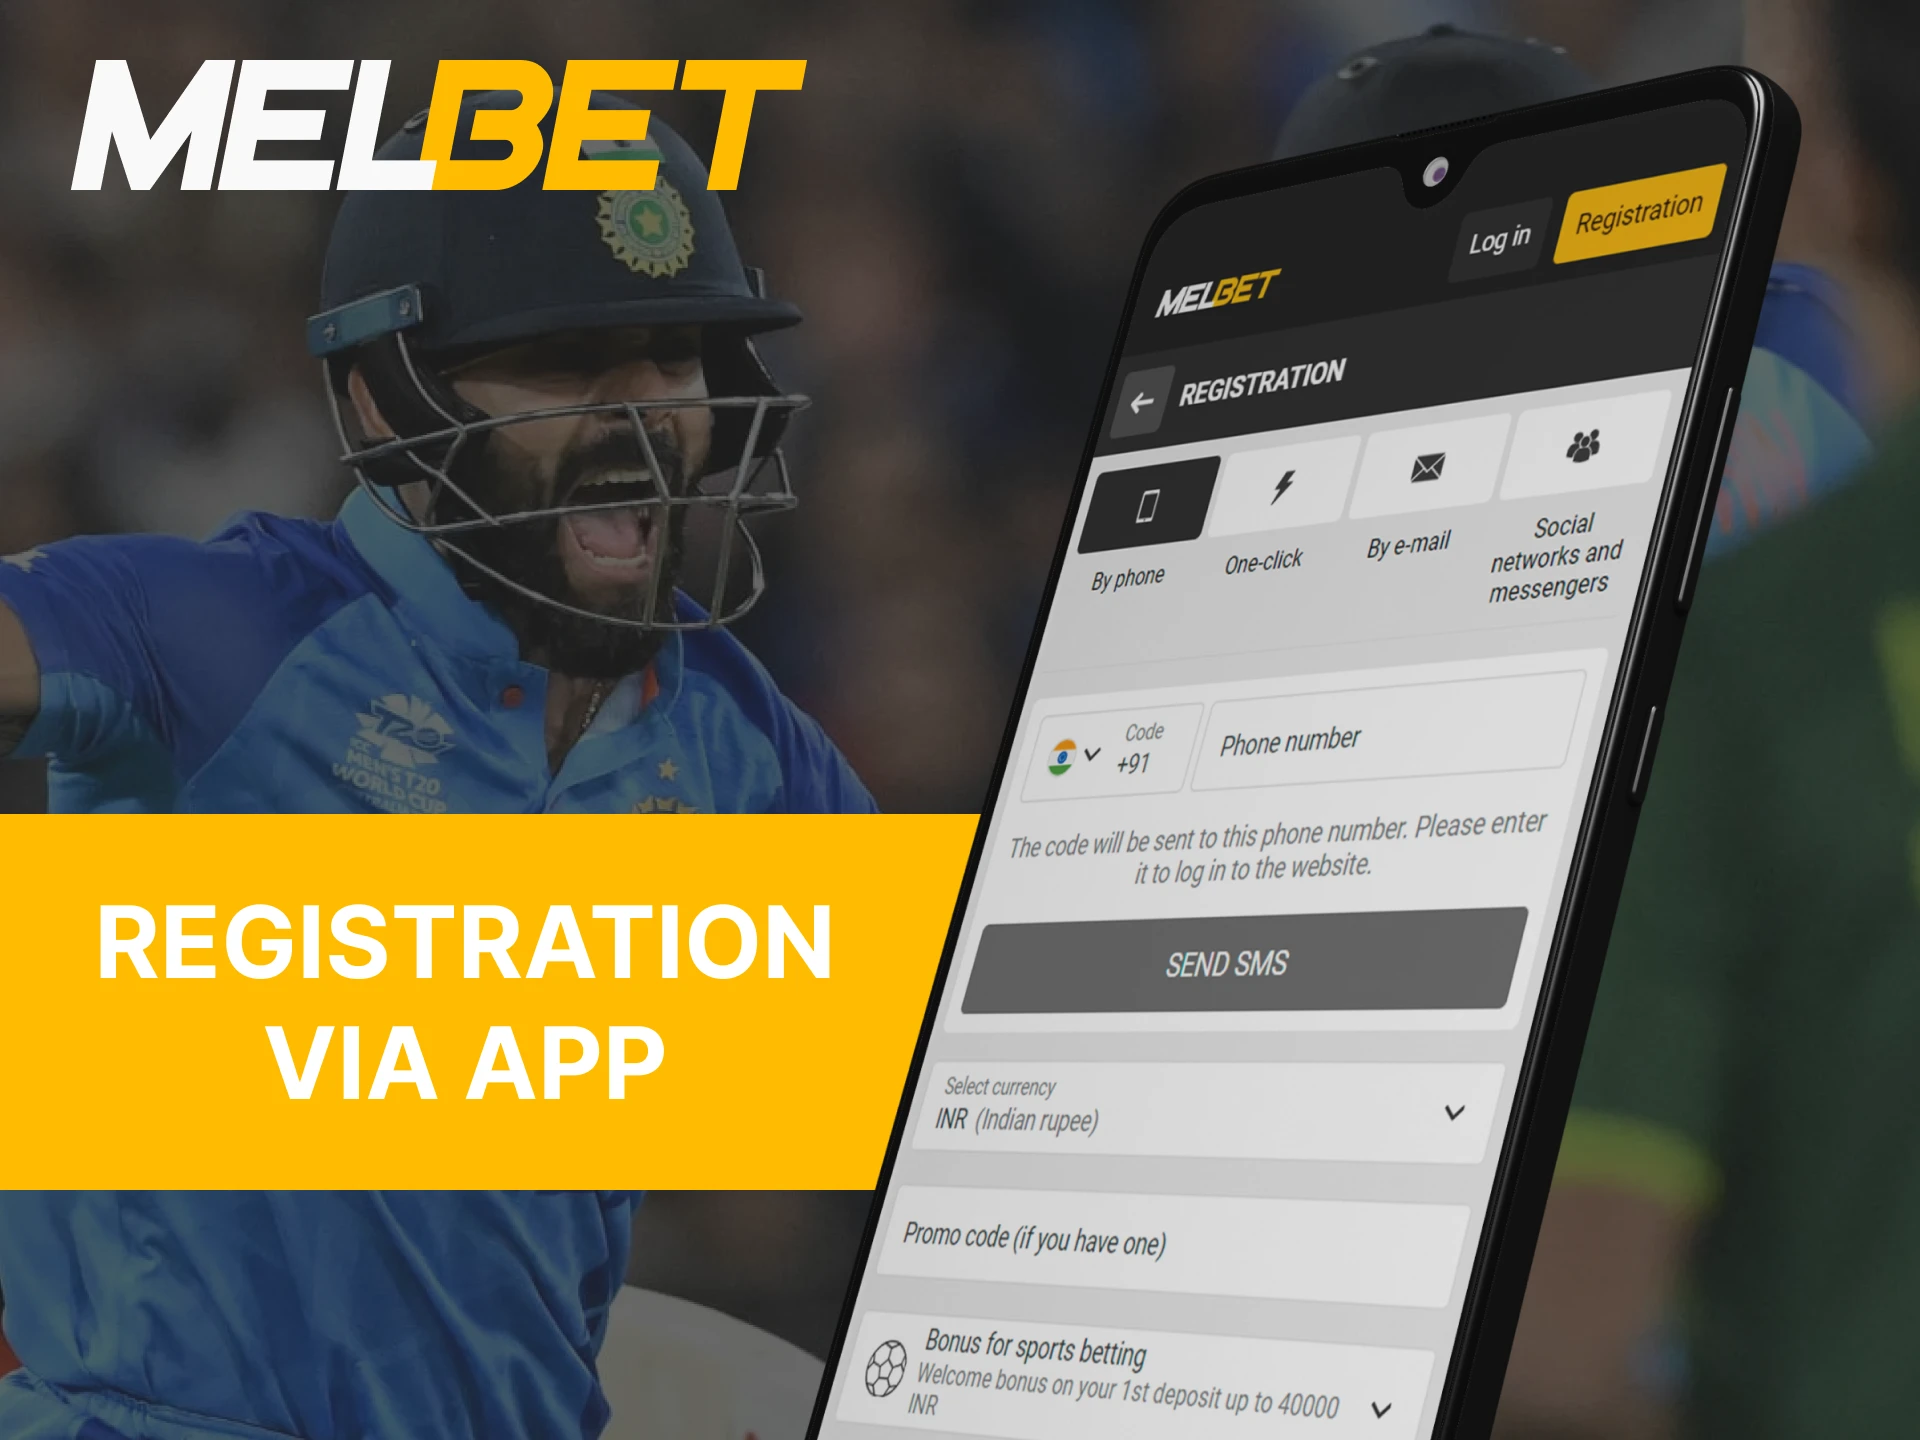 Registration with Melbet through the mobile app is the same as on the website.